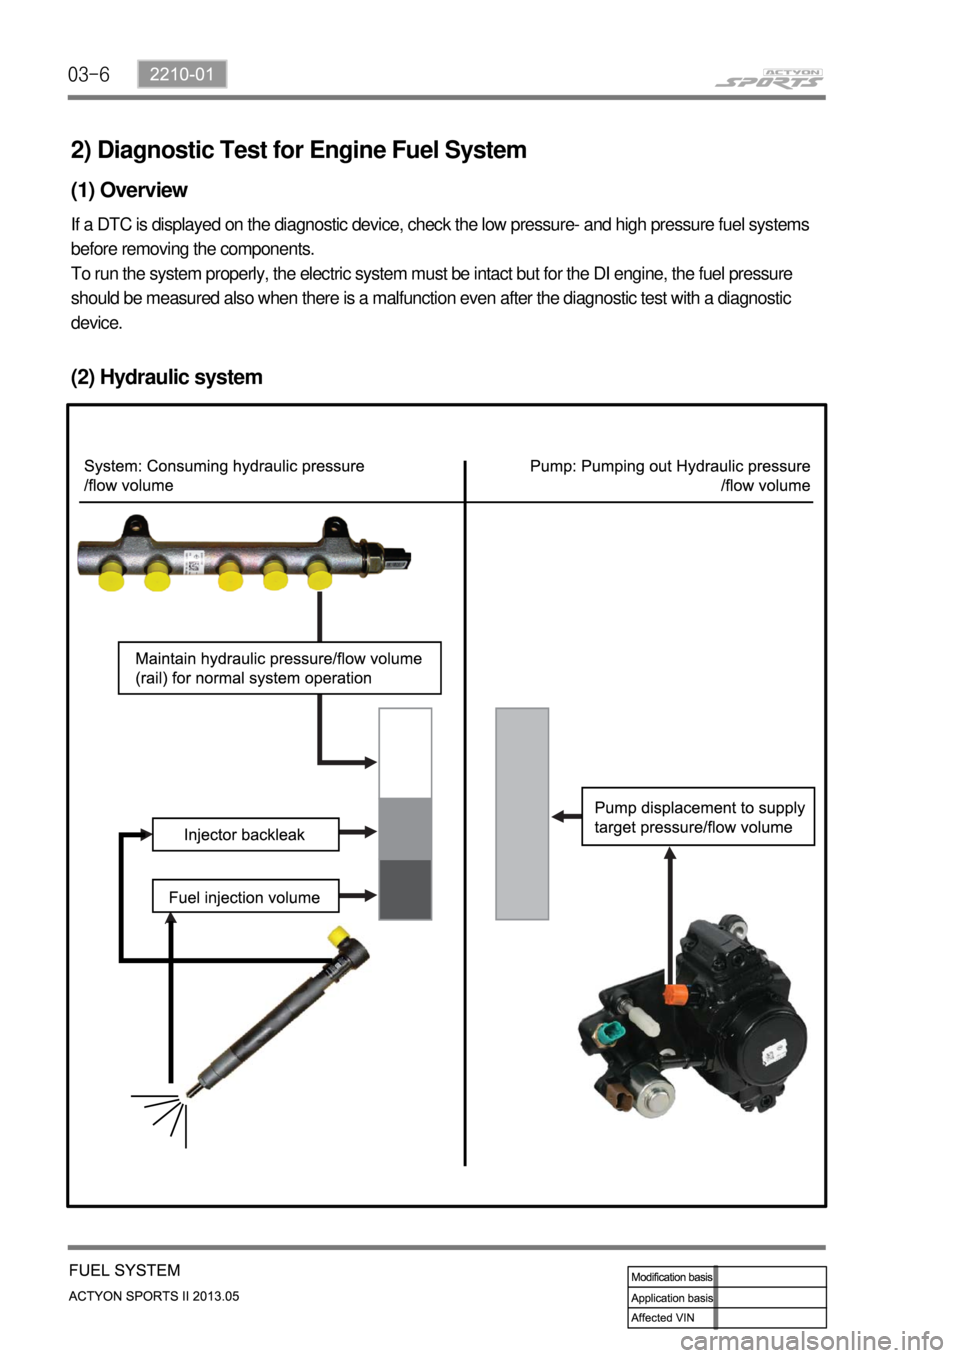 SSANGYONG NEW ACTYON SPORTS 2013  Service Manual 03-6
2) Diagnostic Test for Engine Fuel System
(1) Overview
If a DTC is displayed on the diagnostic device, check the low pressure- and high pressure fuel systems 
before removing the components.
To r